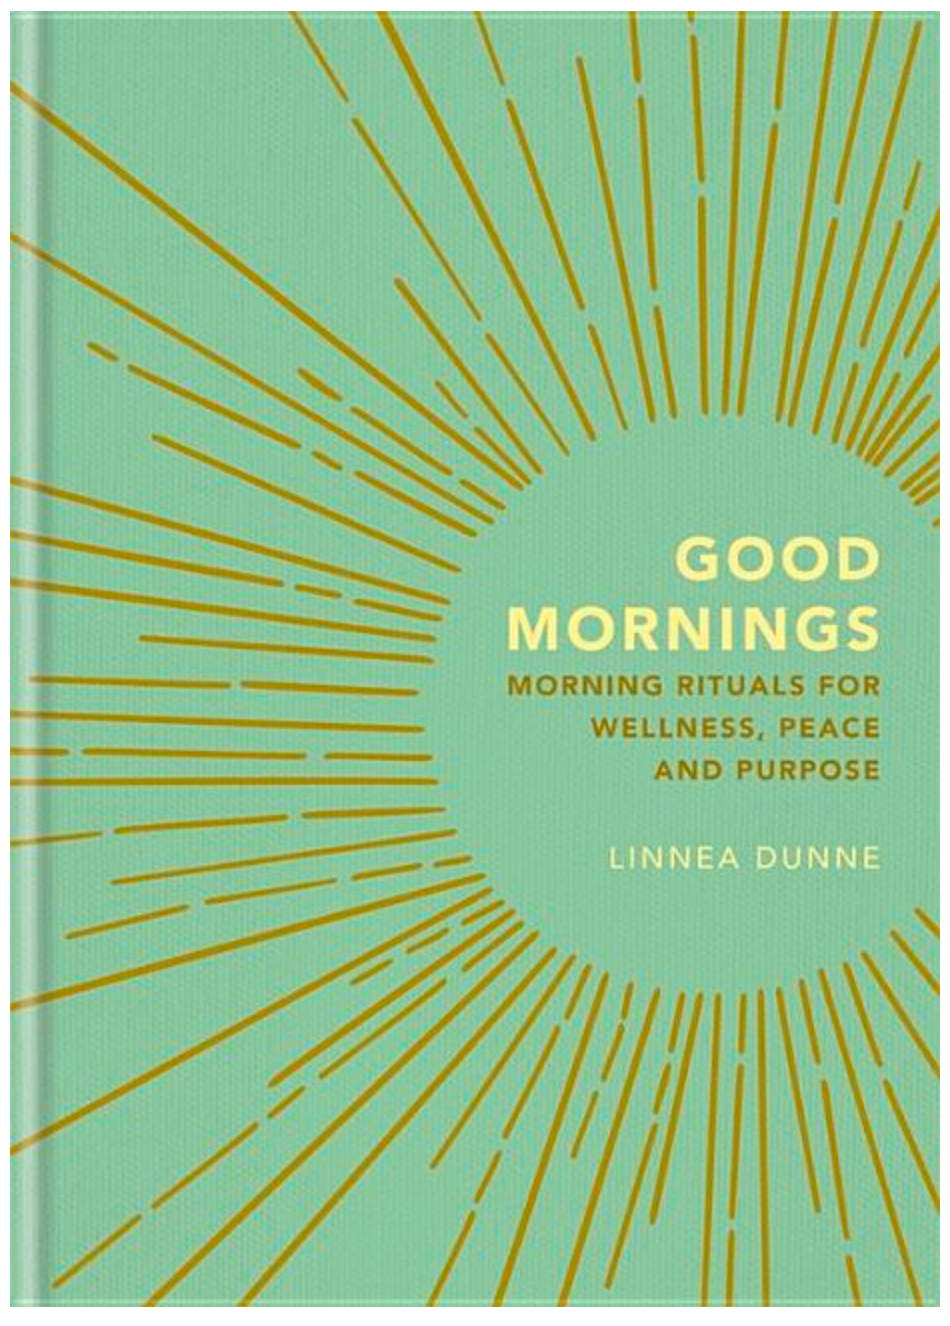 Good Mornings: Morning Rituals for Wellness, Peace and Purpose - Gather Goods Co - Raleigh, NC